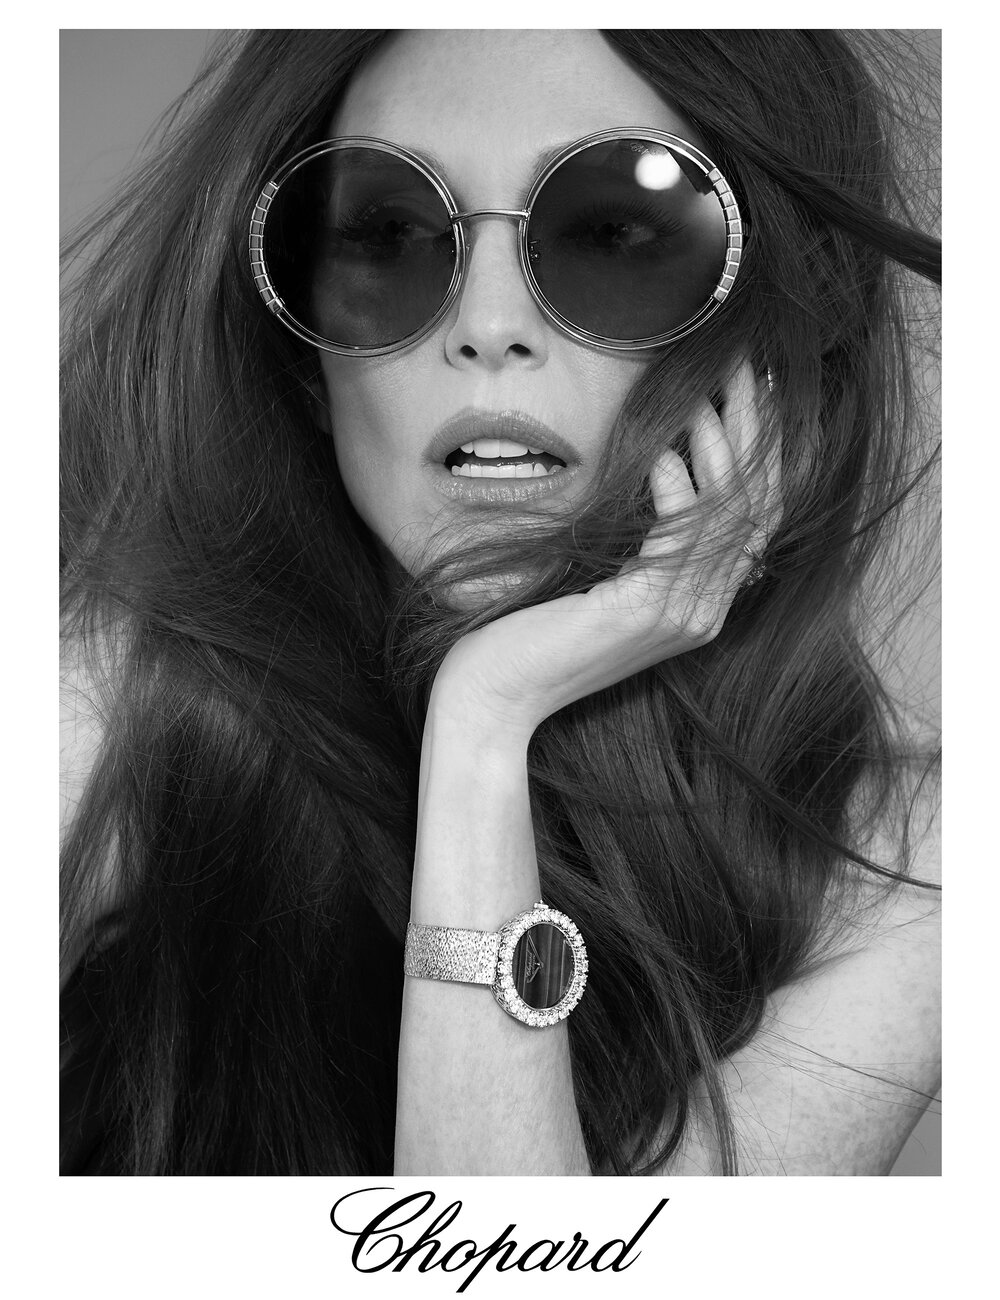 Chopard 5 by Andreas ORTNER